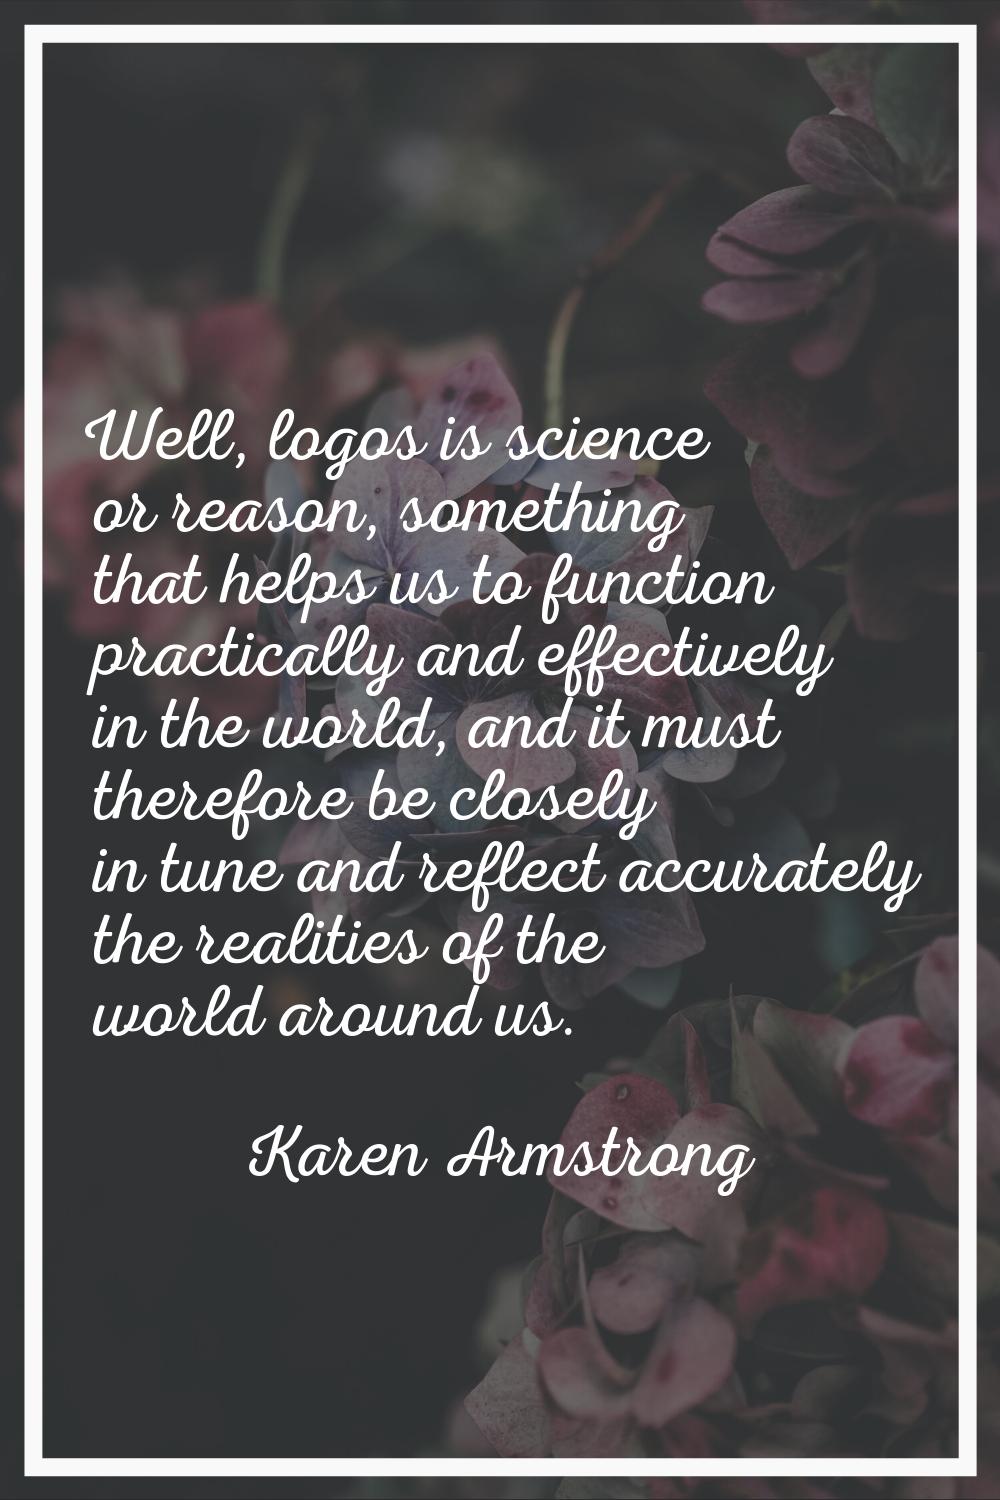 Well, logos is science or reason, something that helps us to function practically and effectively i